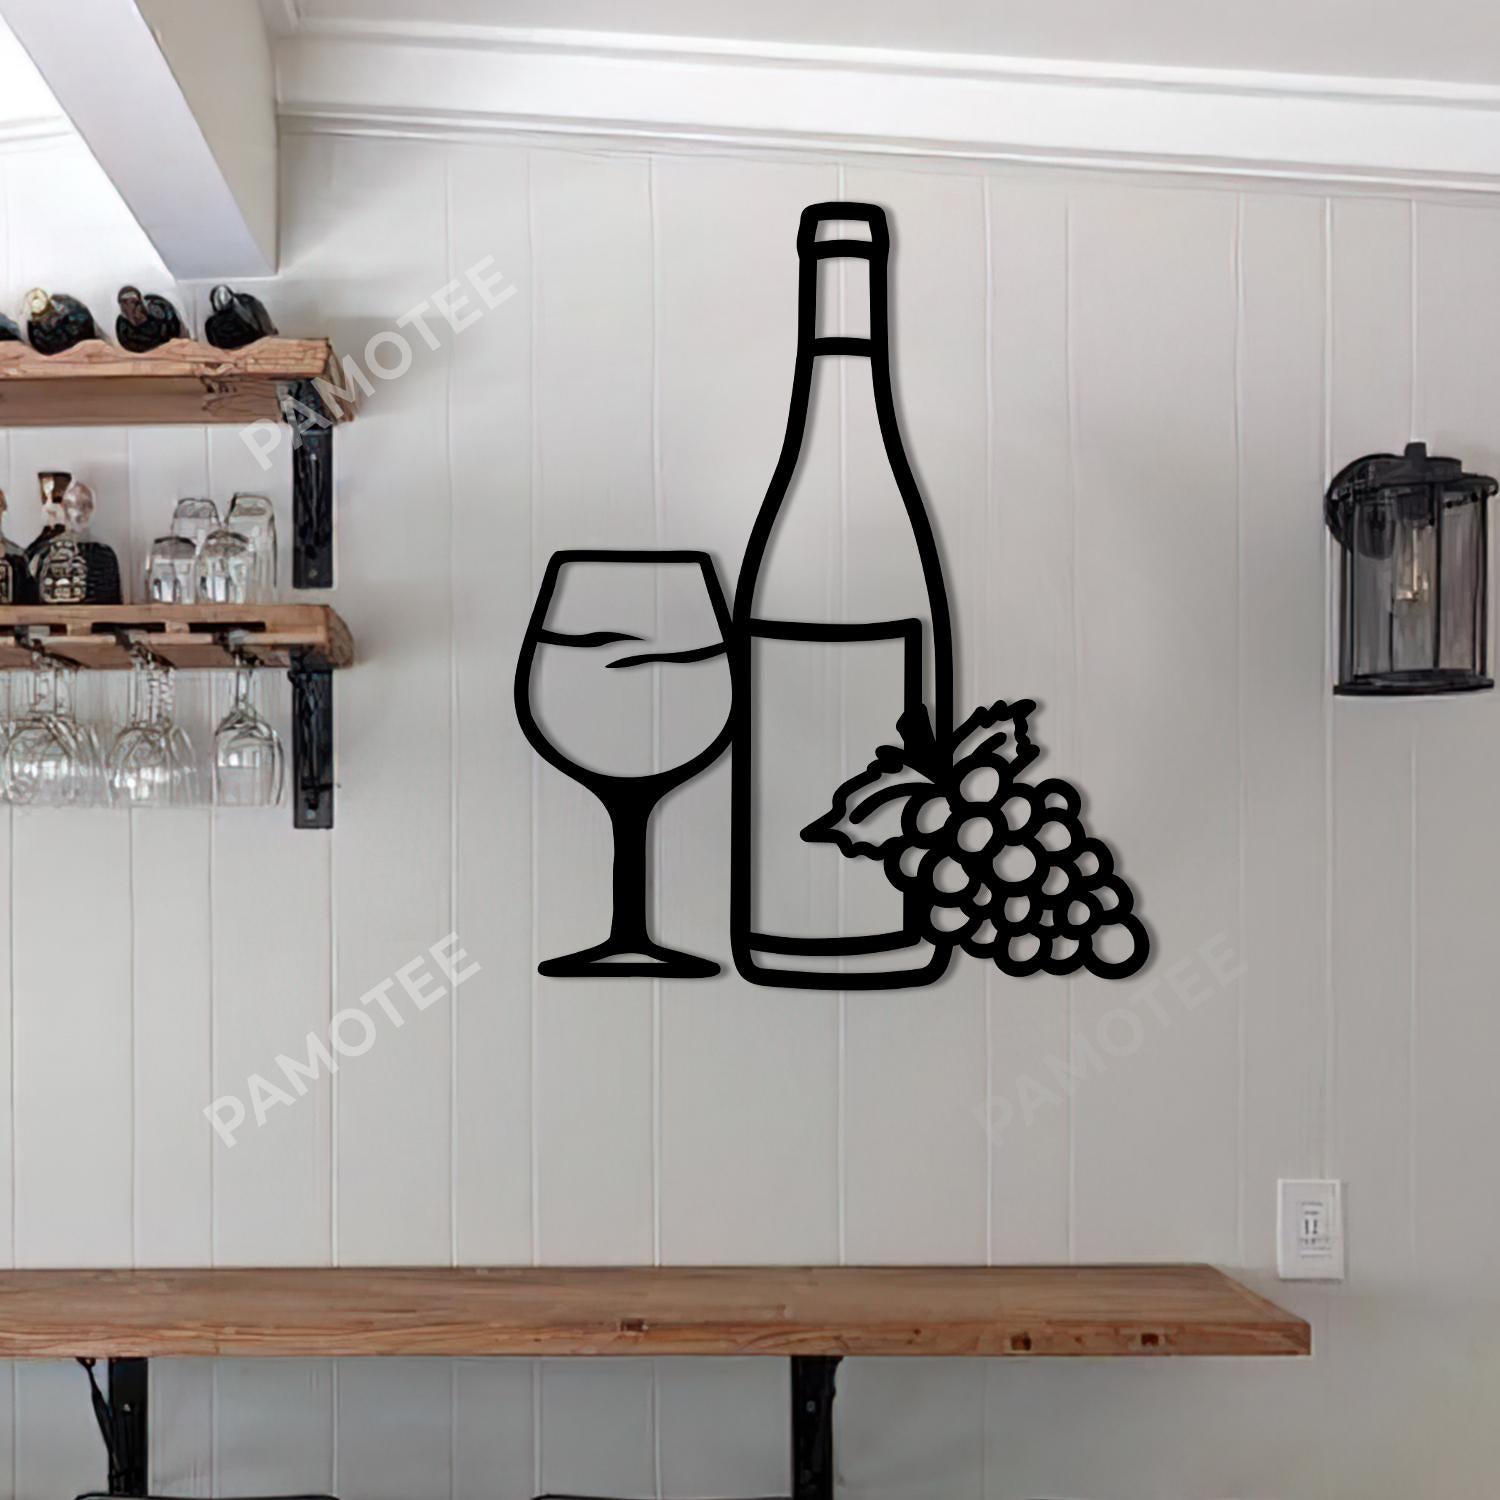 Glass Wine Bottle Grape Wall Art Metal, Bar Sign Home Decor, Many Size And Color